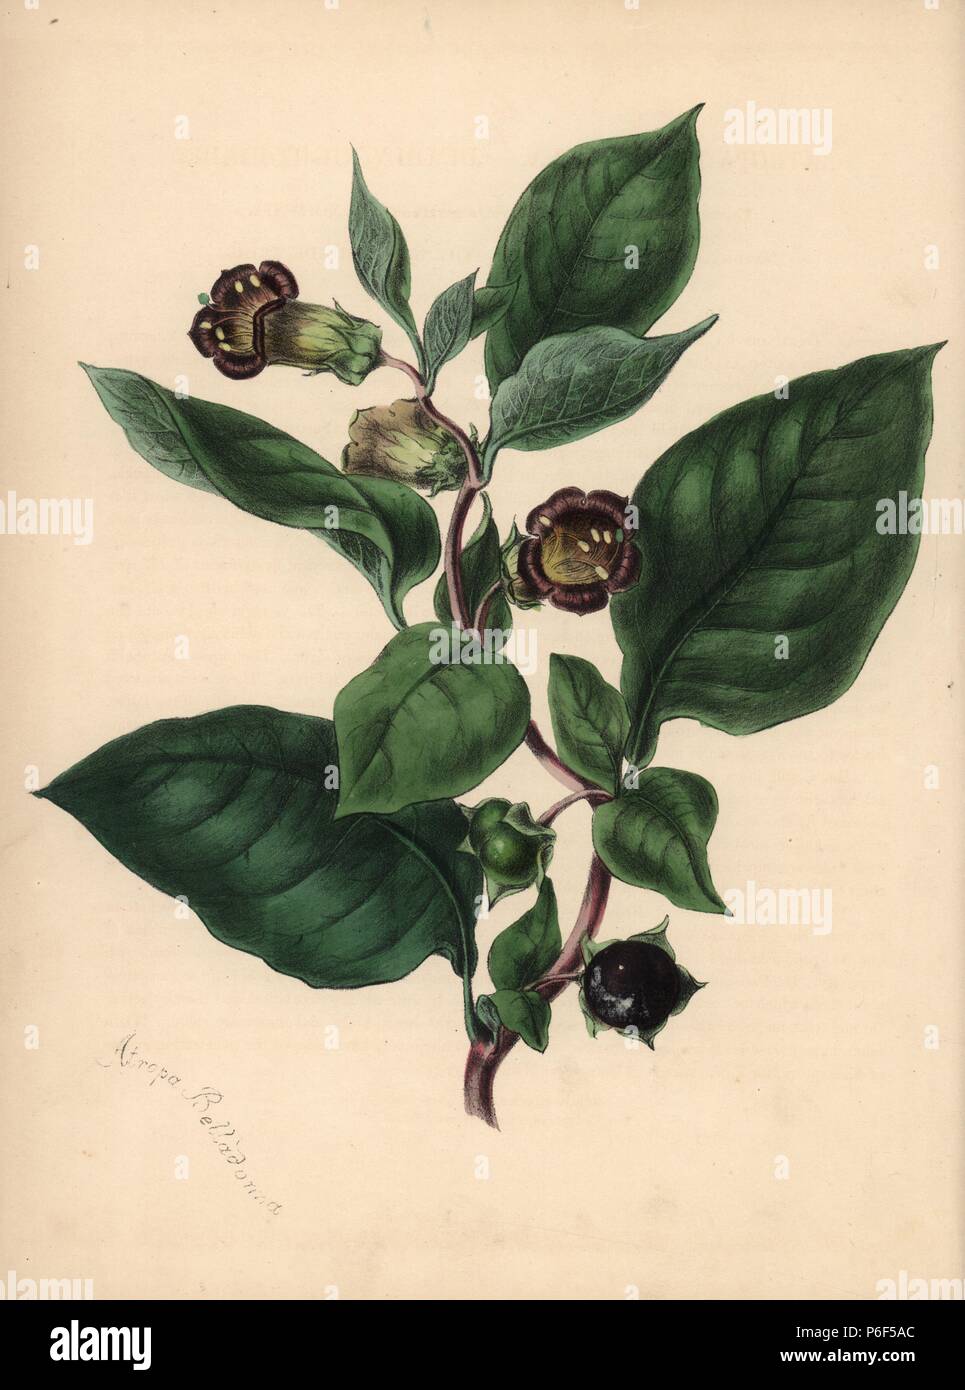 Deadly nightshade, Atropa belladonna. Handcoloured zincograph by Chabots drawn by Miss M. A. Burnett from her 'Plantae Utiliores: or Illustrations of Useful Plants,' Whittaker, London, 1842. Miss Burnett drew the botanical illustrations, but the text was chiefly by her late brother, British botanist Gilbert Thomas Burnett (1800-1835). Stock Photo